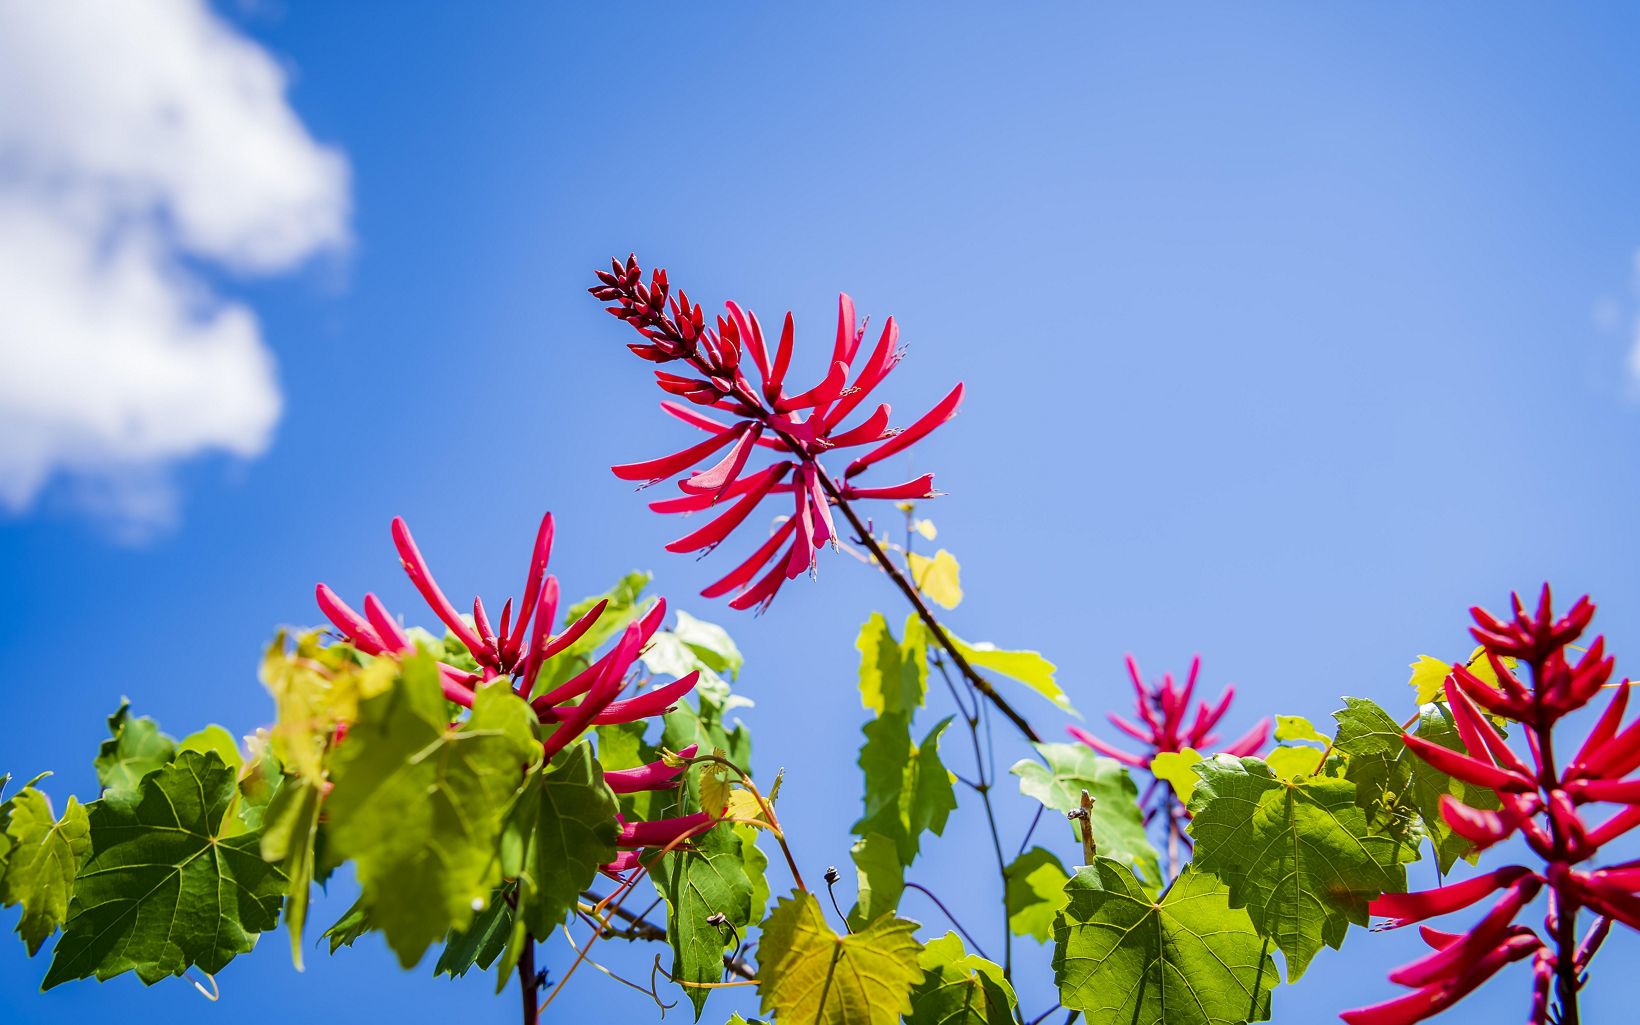 
                
                  Coral Bean and Blue Sky The brilliant red coral bean flower (Erythrina herbacea) grows wild on the preserve. 
                  © Roberto Gonzalez
                
              